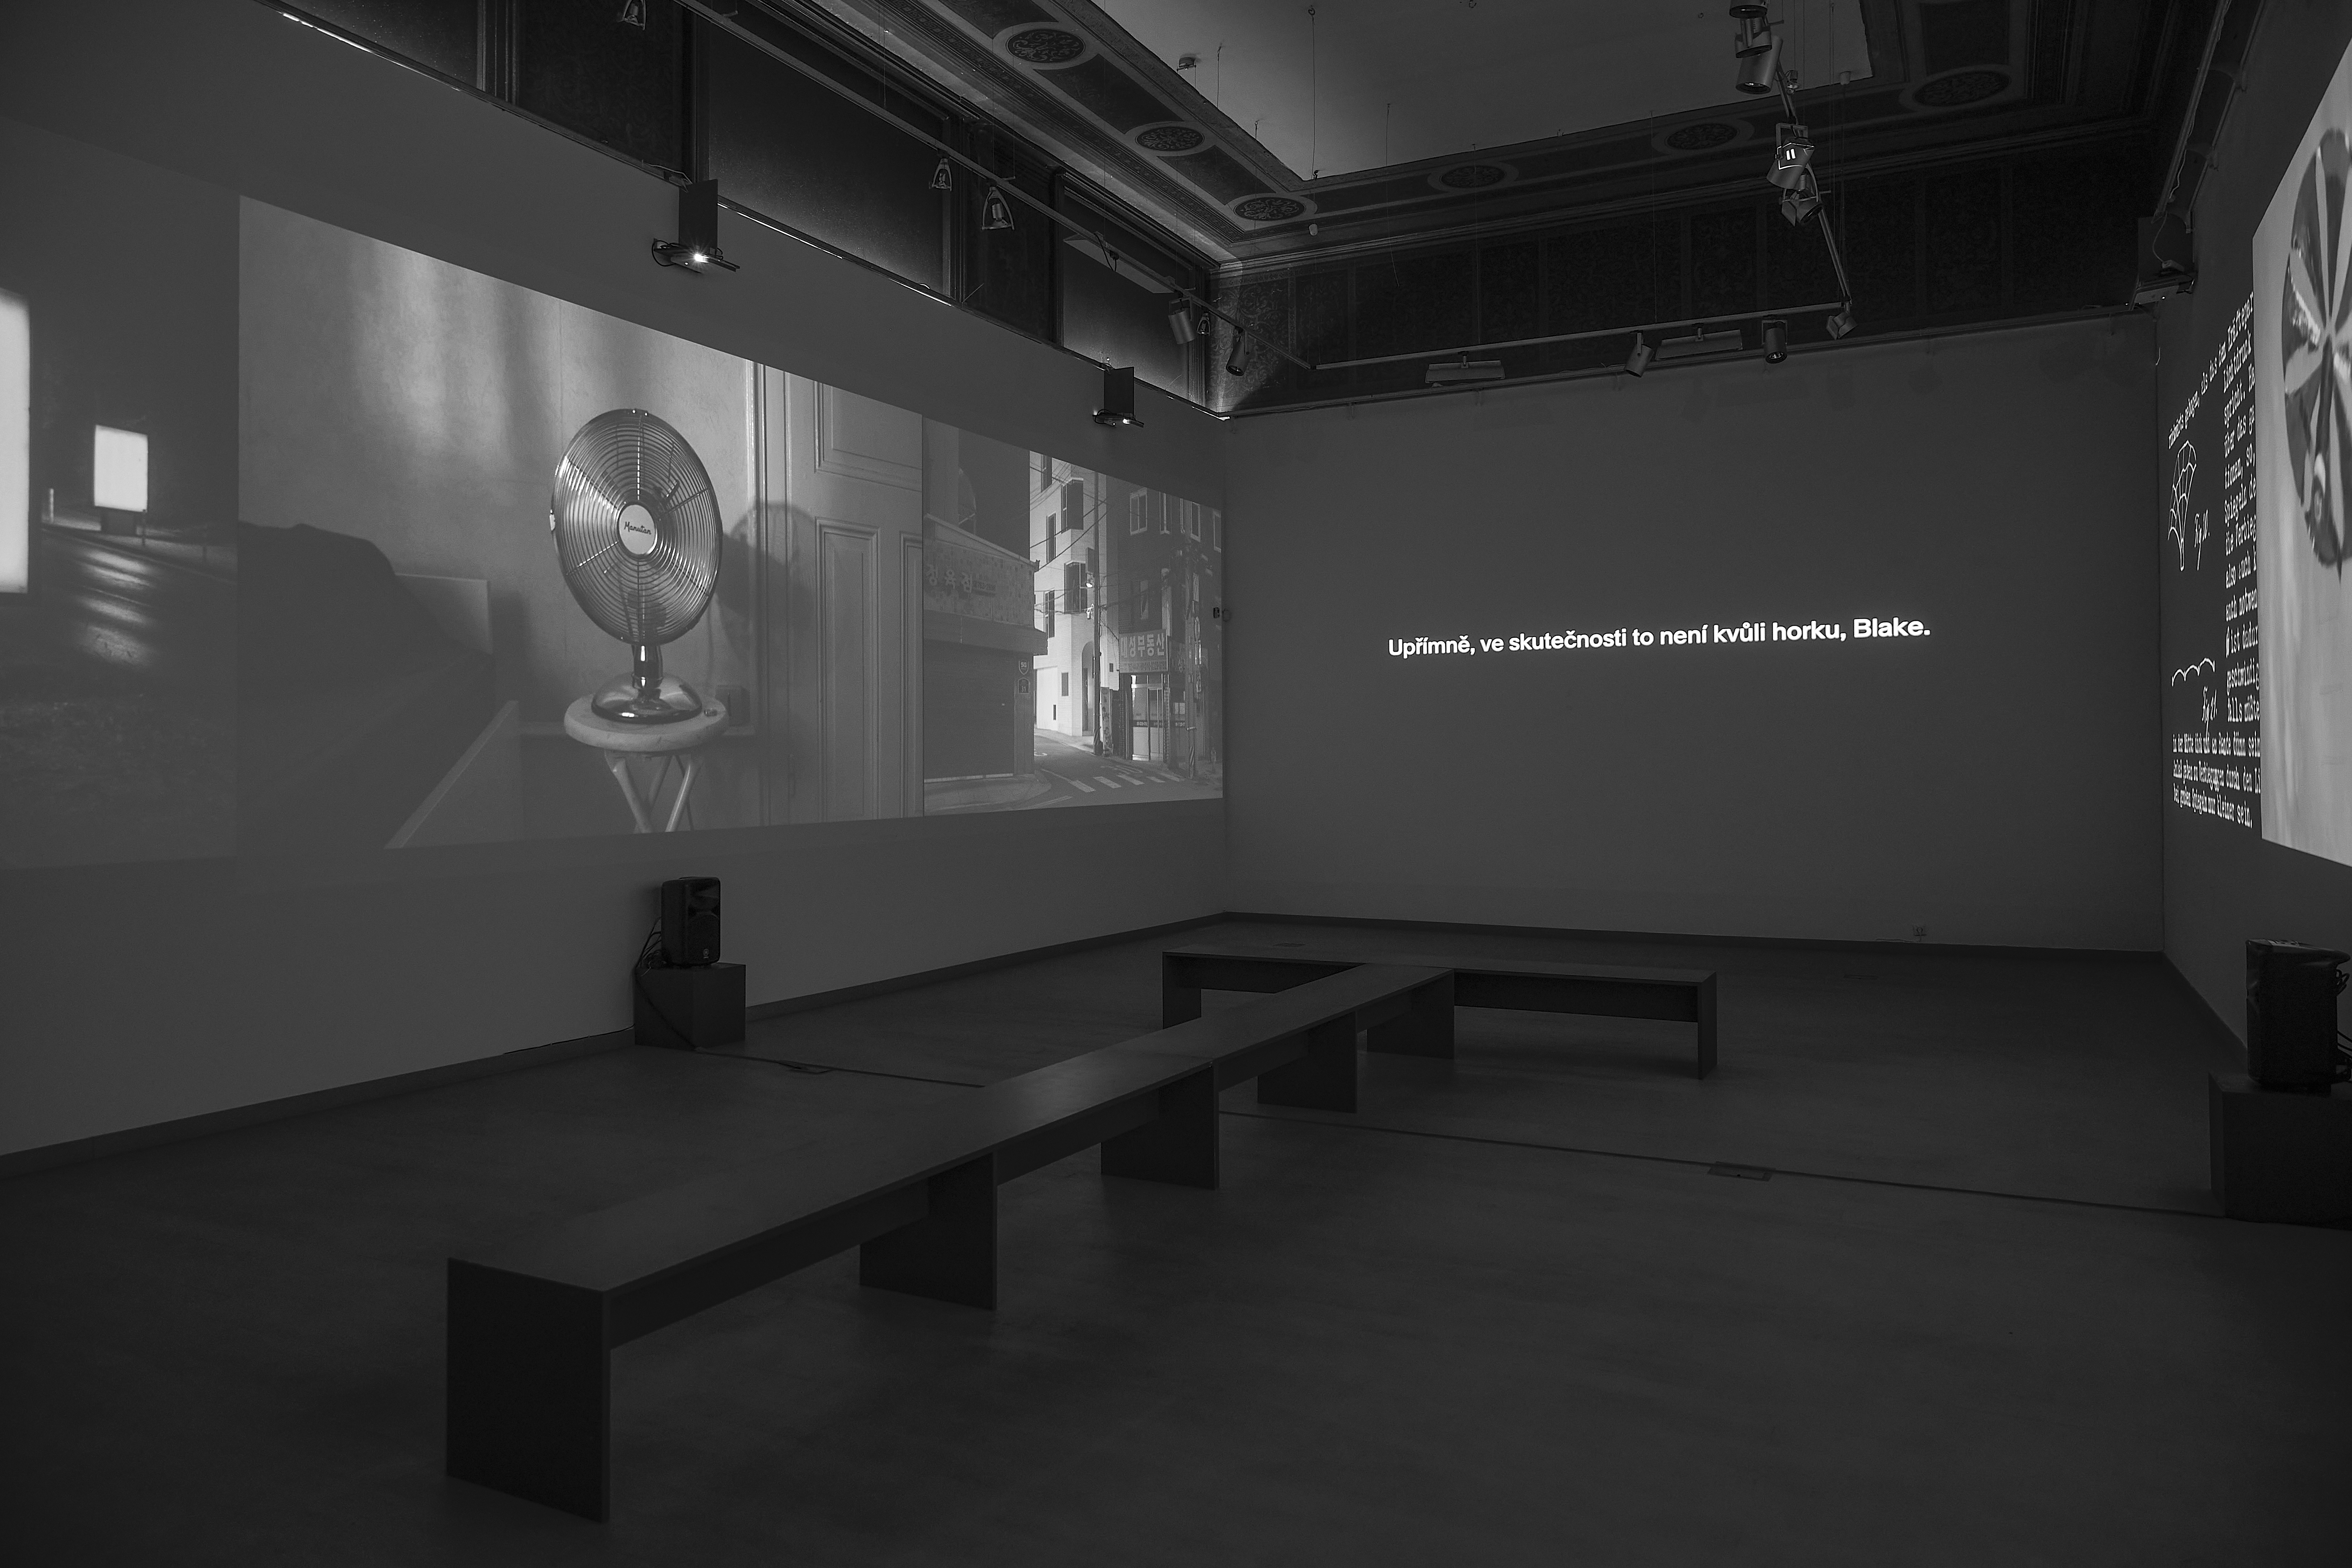 A black and white multi-channel video installation on the gallery walls consisting of a projection of photographs of empty citylights on the left wall, a spinning fan in a night room, a shot of a night street in Seoul, a caption to an audio track on the middle wall, a white graph on a black background on the right, and a shot of a circular satellite with a reflective surface of mirrors.